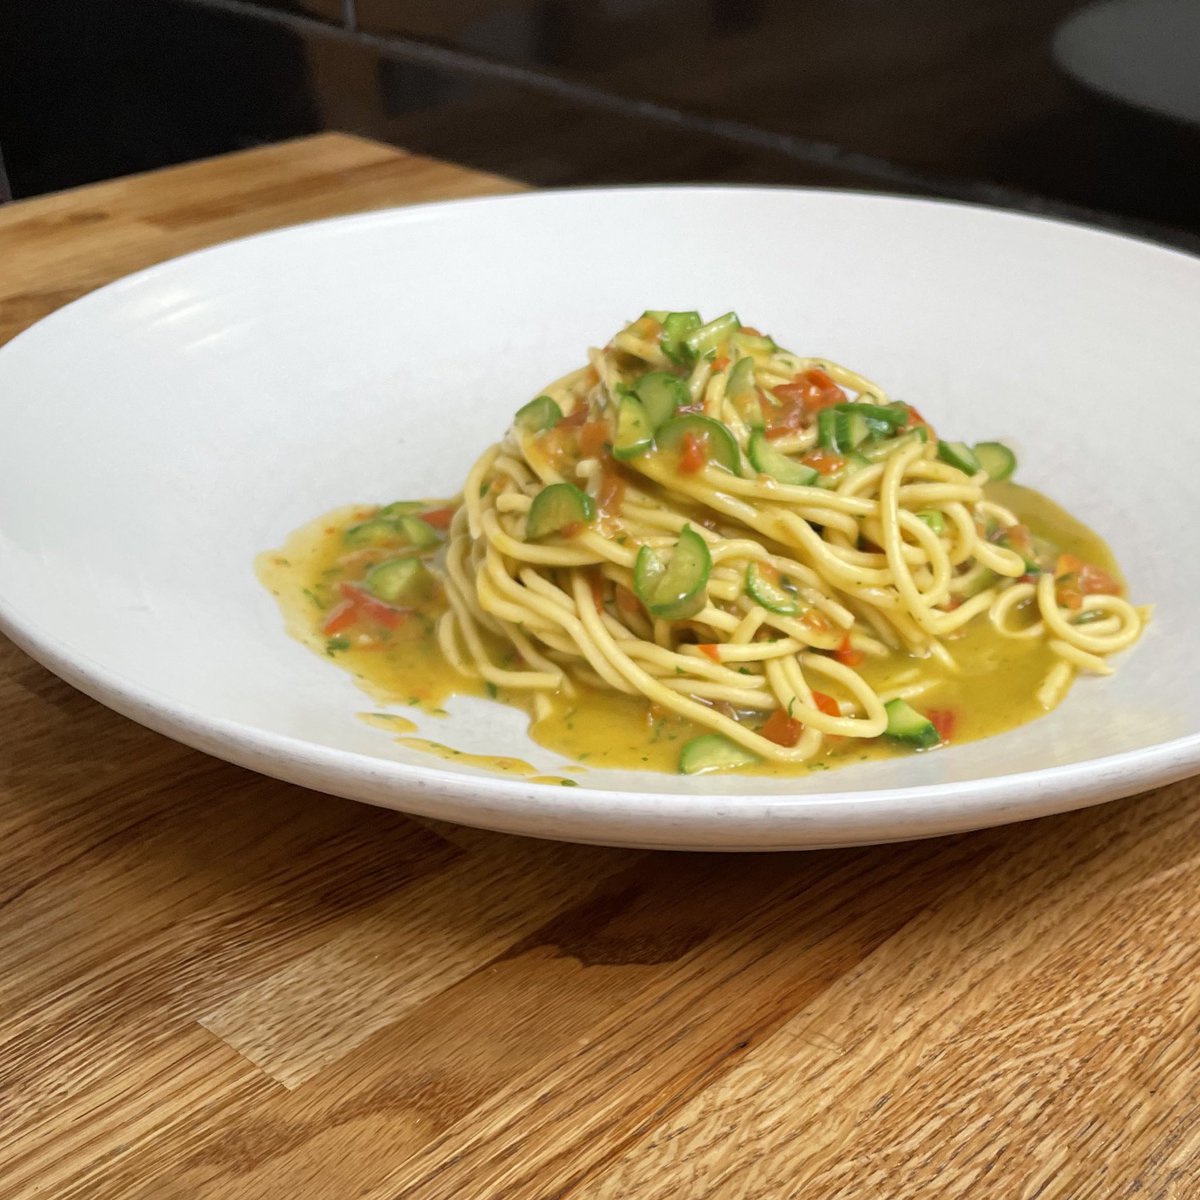 Homemade tagliolini with baby courgettes and their flowers.

#walthamforesteats #leyton #wanstead #forestgate #londonrestaurants #tastelondon #summervibes #eatout